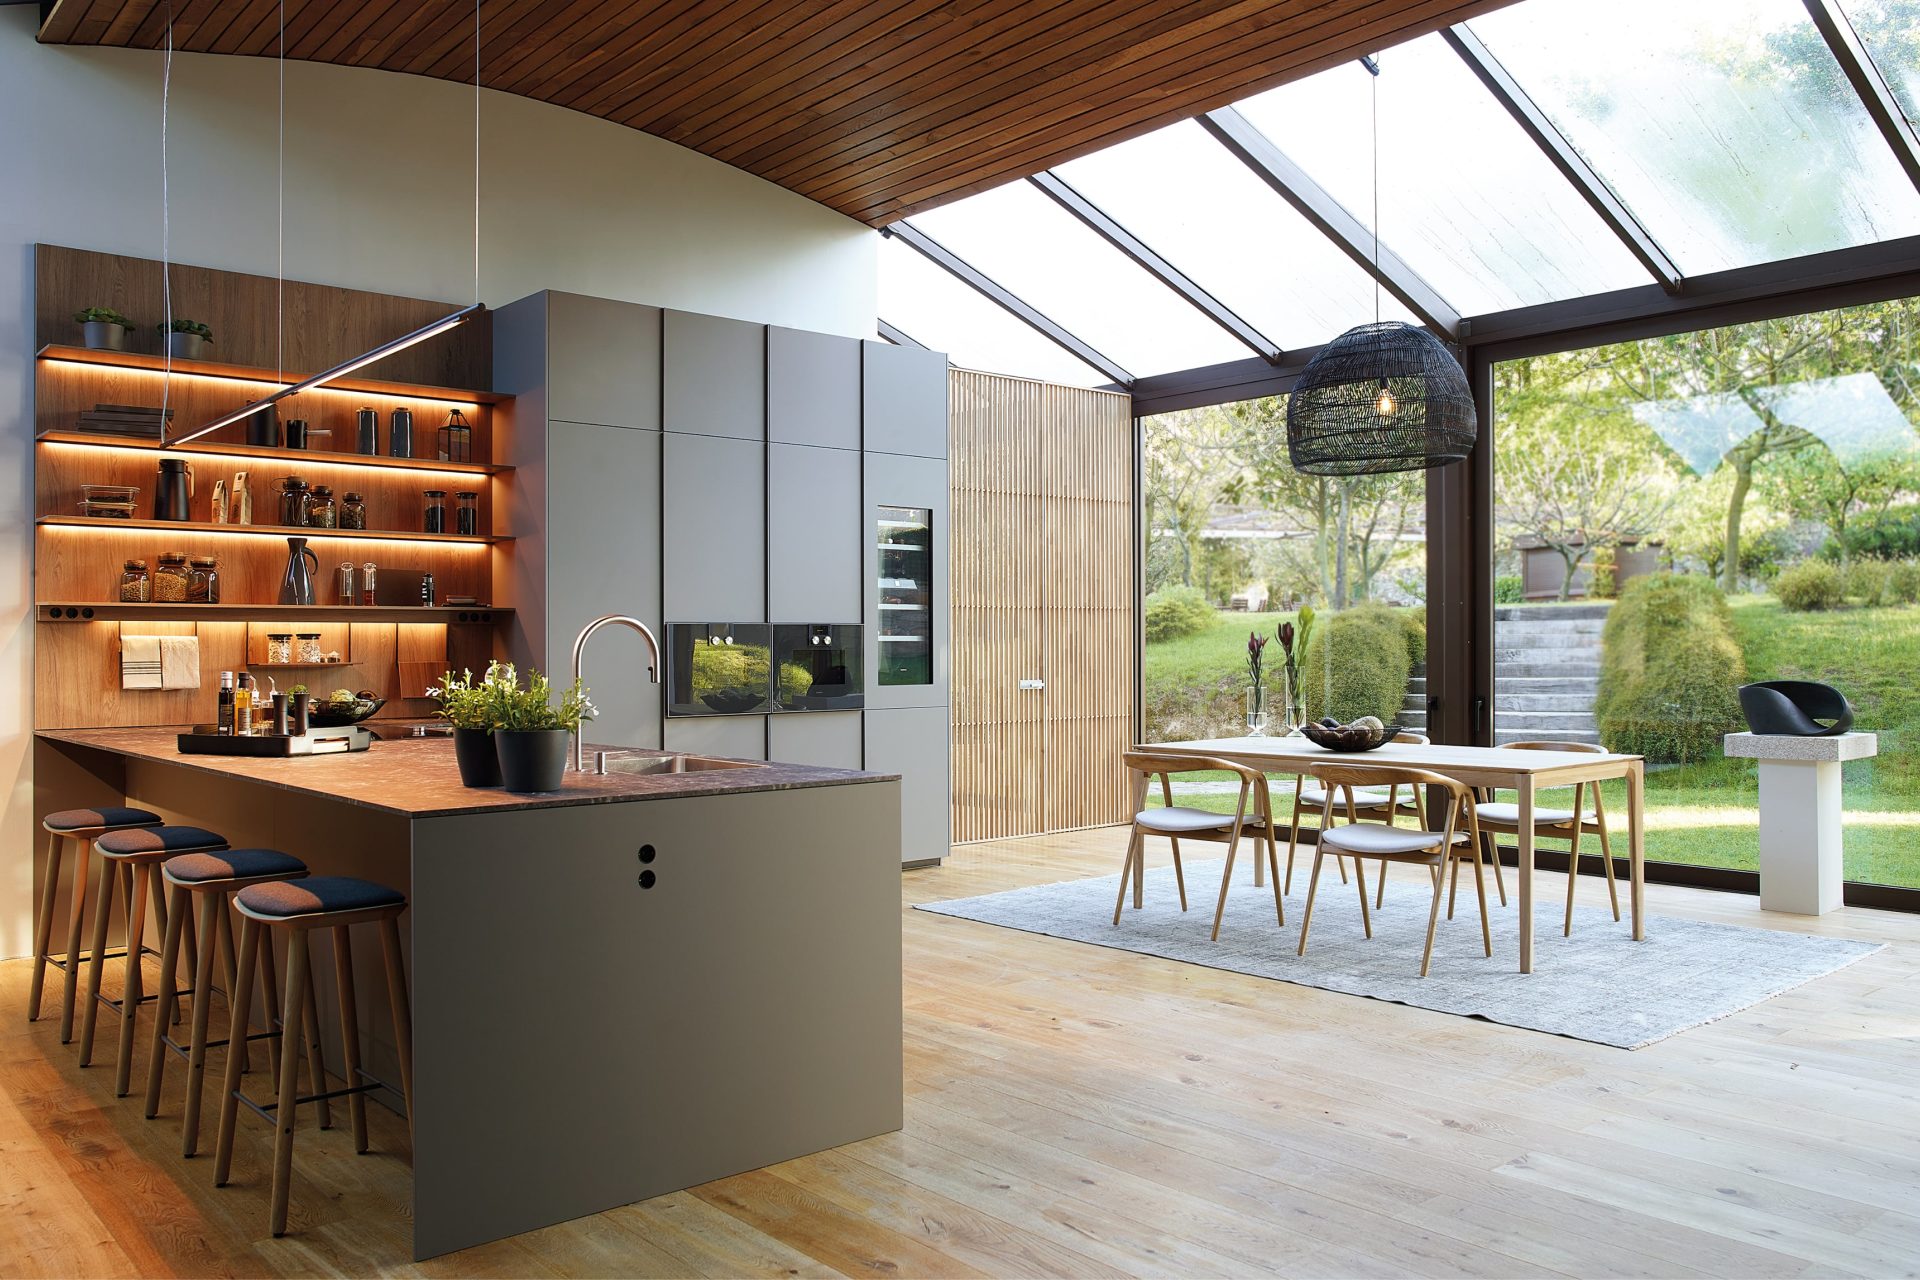 L-shaped kitchen with peninsula and open shelves in wood and grey